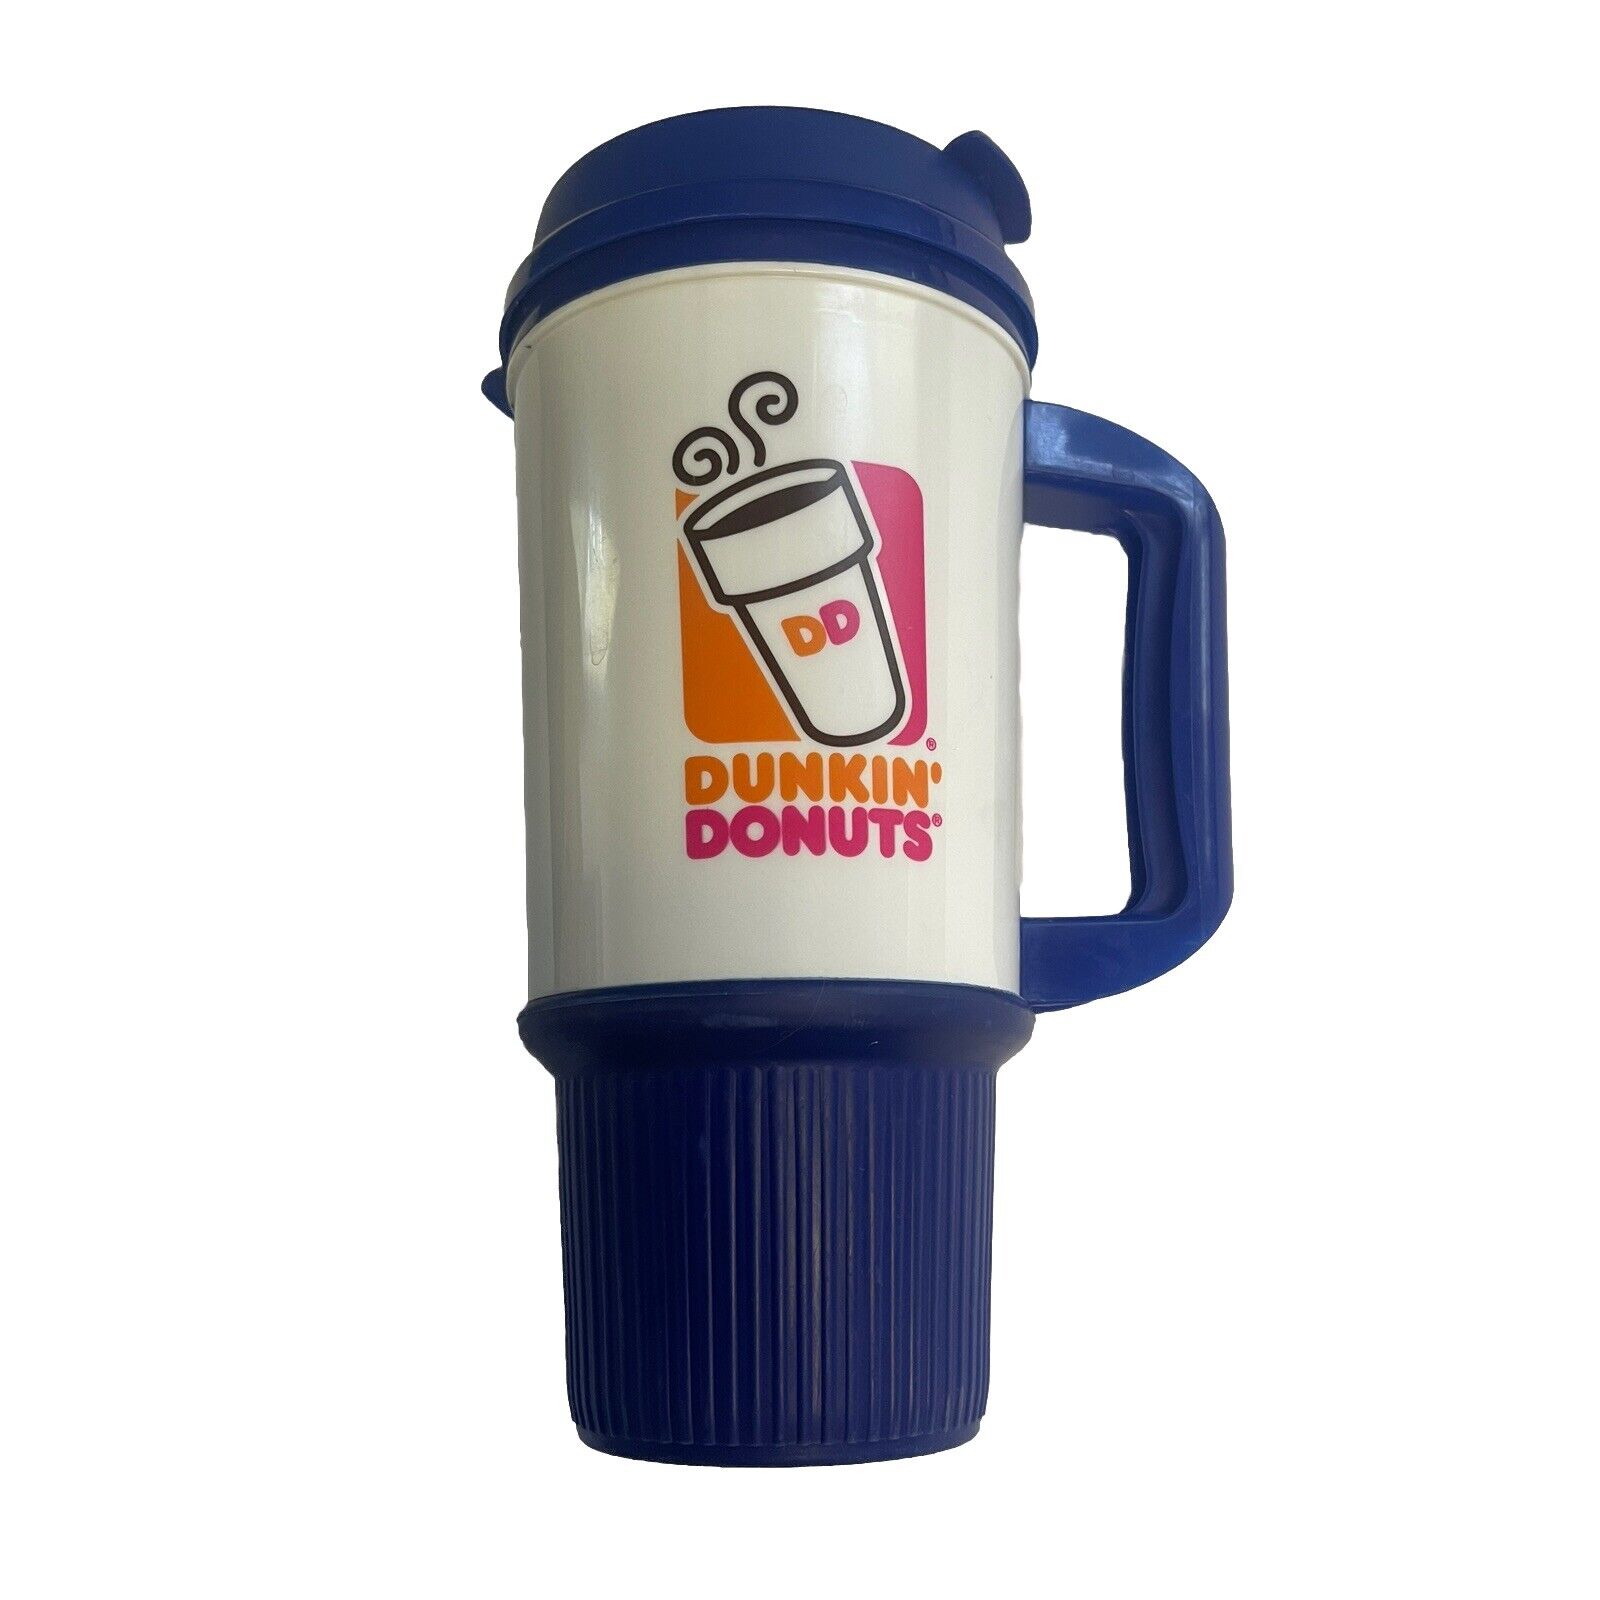 Vintage 2014 Dunkin Donuts Travel Tumbler Classic Navy Blue Made In The USA